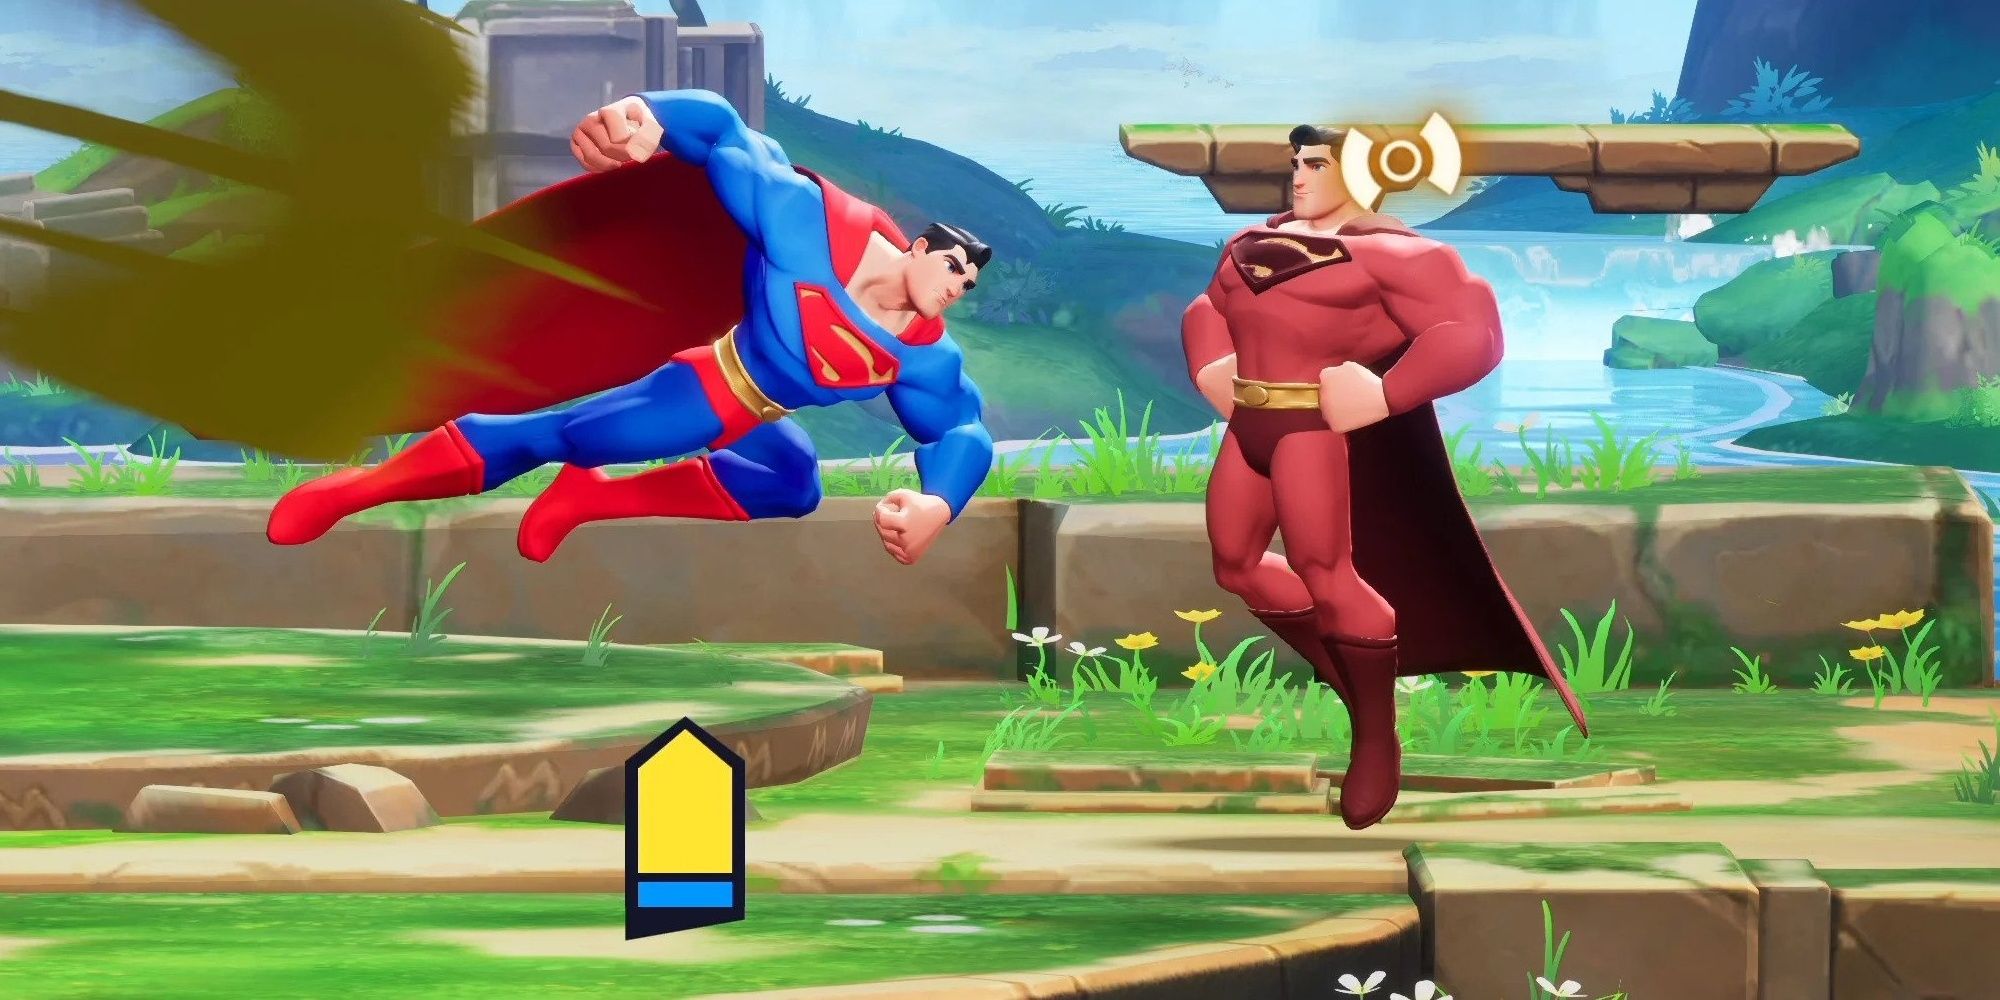 Superman flying at an alternate red suit Superman in MultiVersus